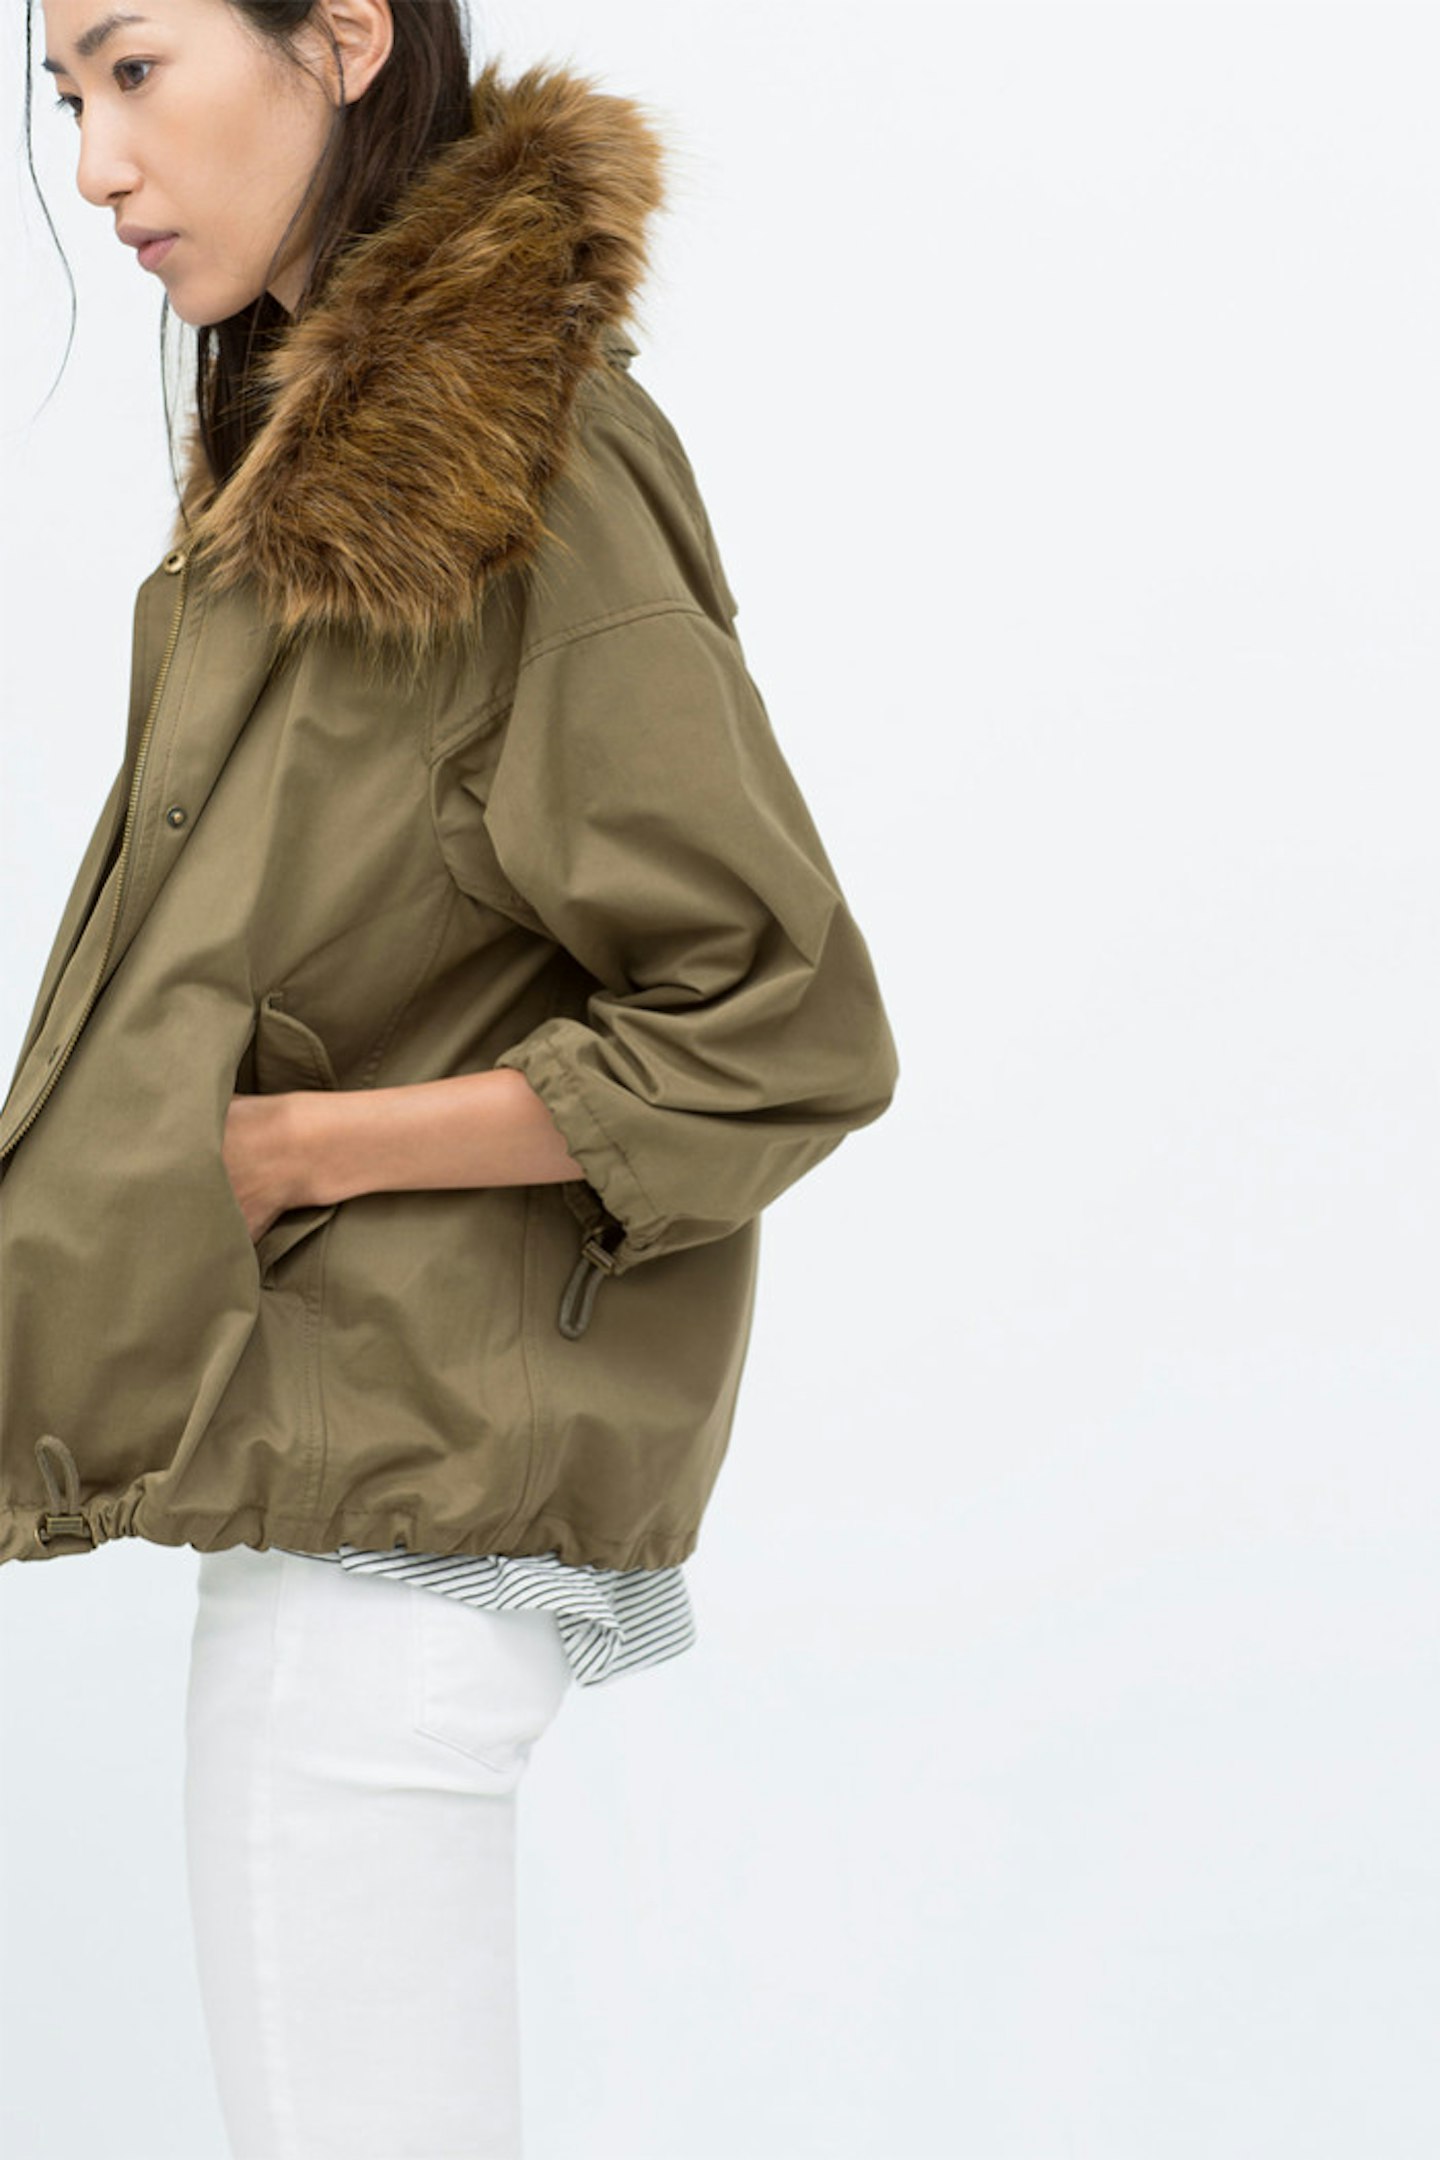 Associate editor Lucy Dunn: 'Call me a pessimist but I'm resigned to the fact that if we get a summer, it's going to be a short one! I've already got an eye out for autumn pieces, which is why this baggy parka bomber caught my eye.'